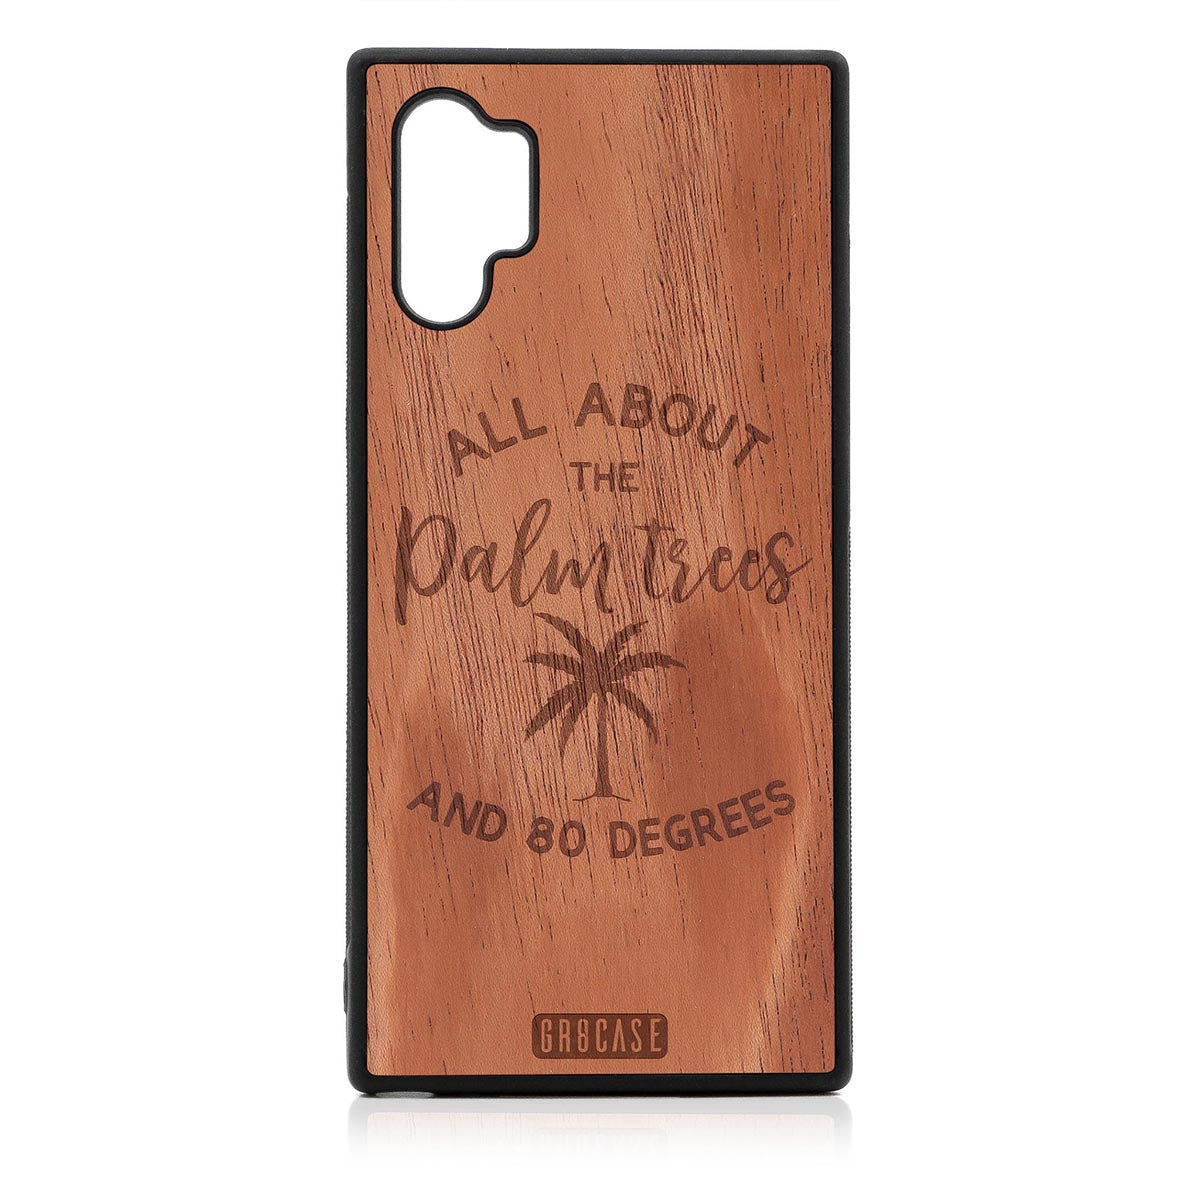 All About The Palm Trees and 80 Degrees Design Wood Case For Samsung Galaxy Note 10 Plus by GR8CASE